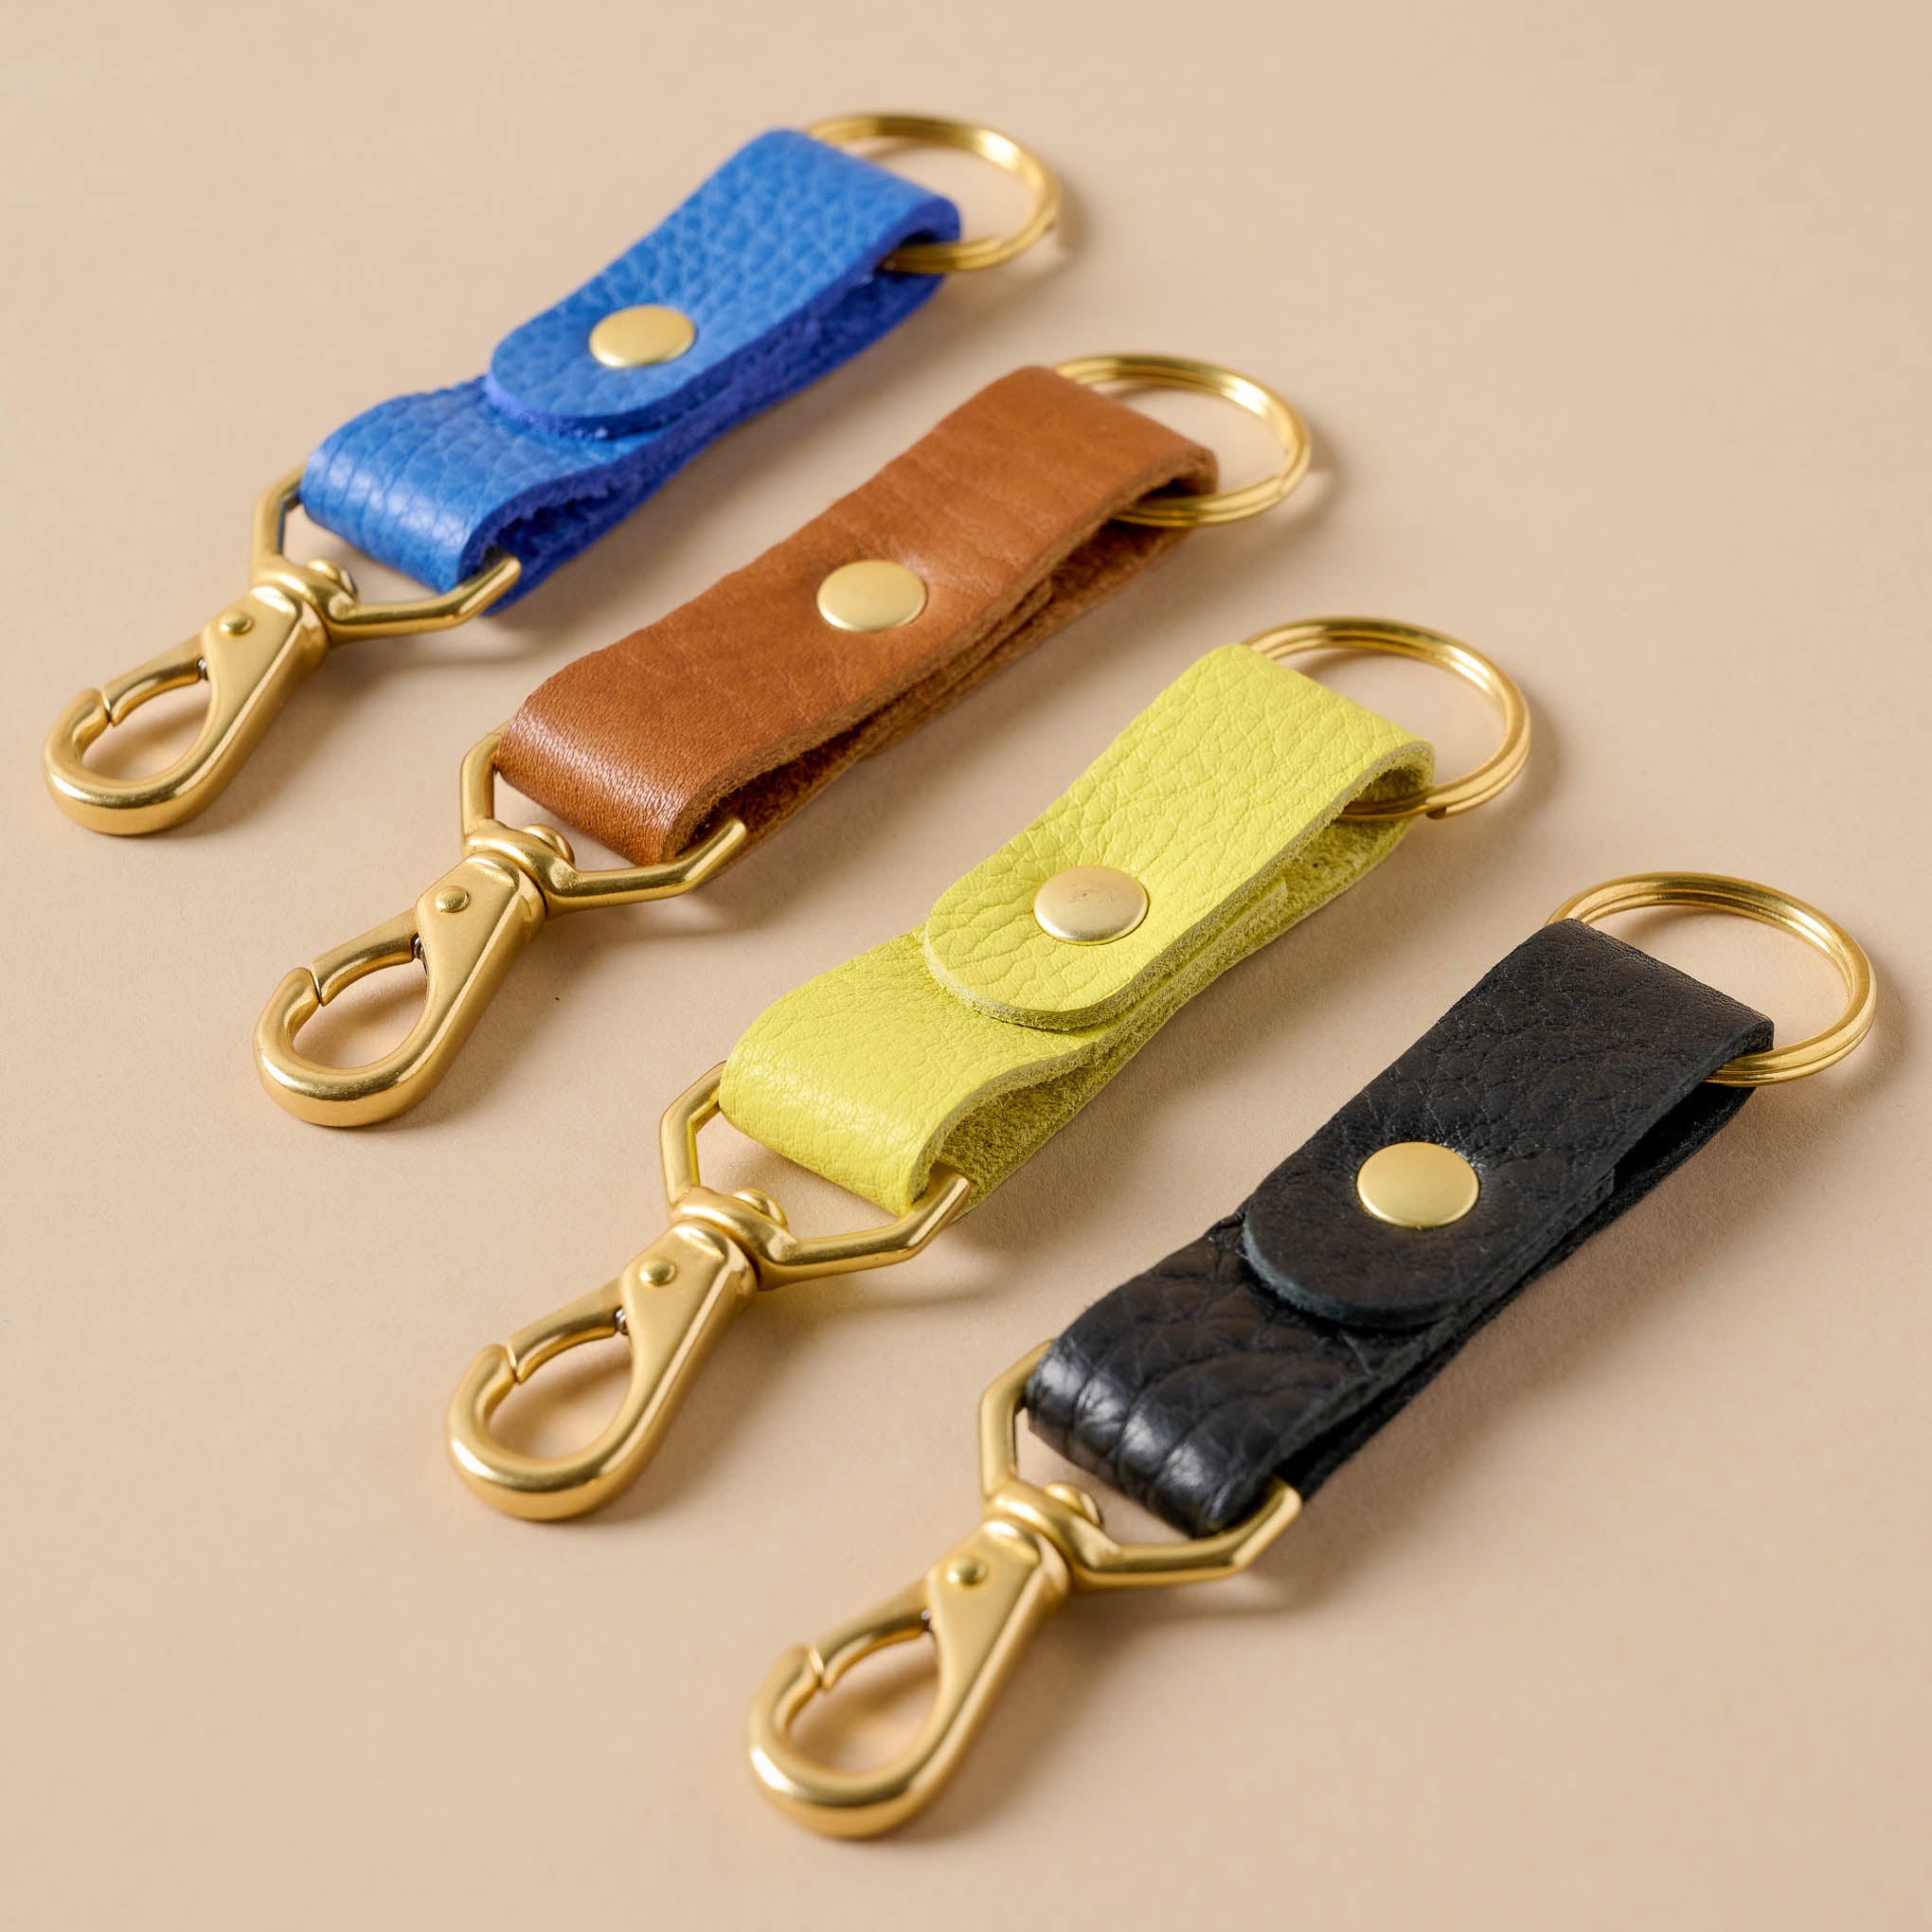  Luca-S Key Chain Kit, Leather Craft Kit, Leather Keychain Set,  Leather Key Ring Craft Kit